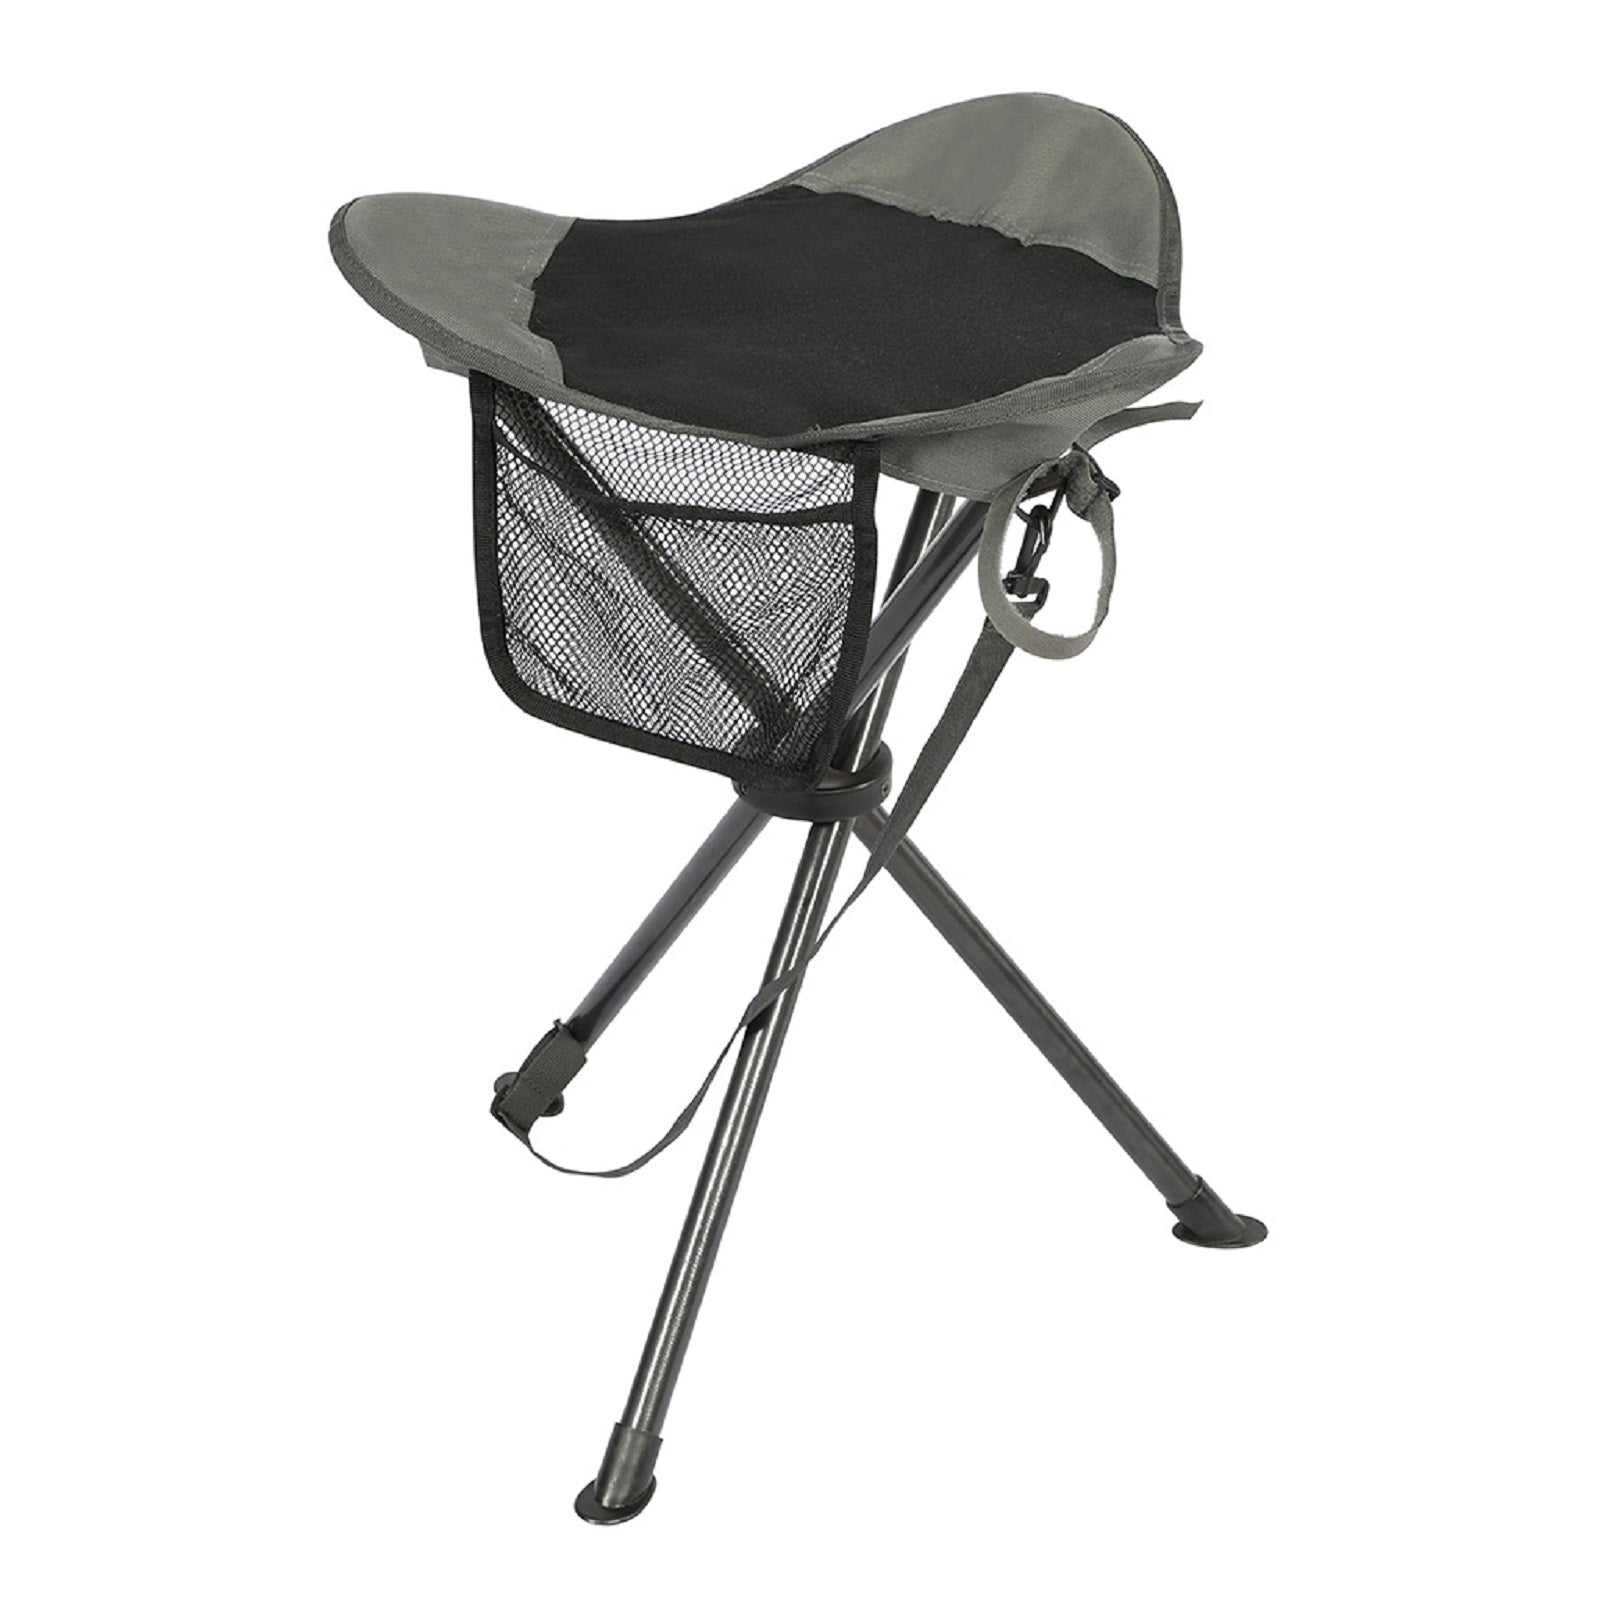 Generic Outdoor Folding Stool Camping Fishing Chair High @ Best